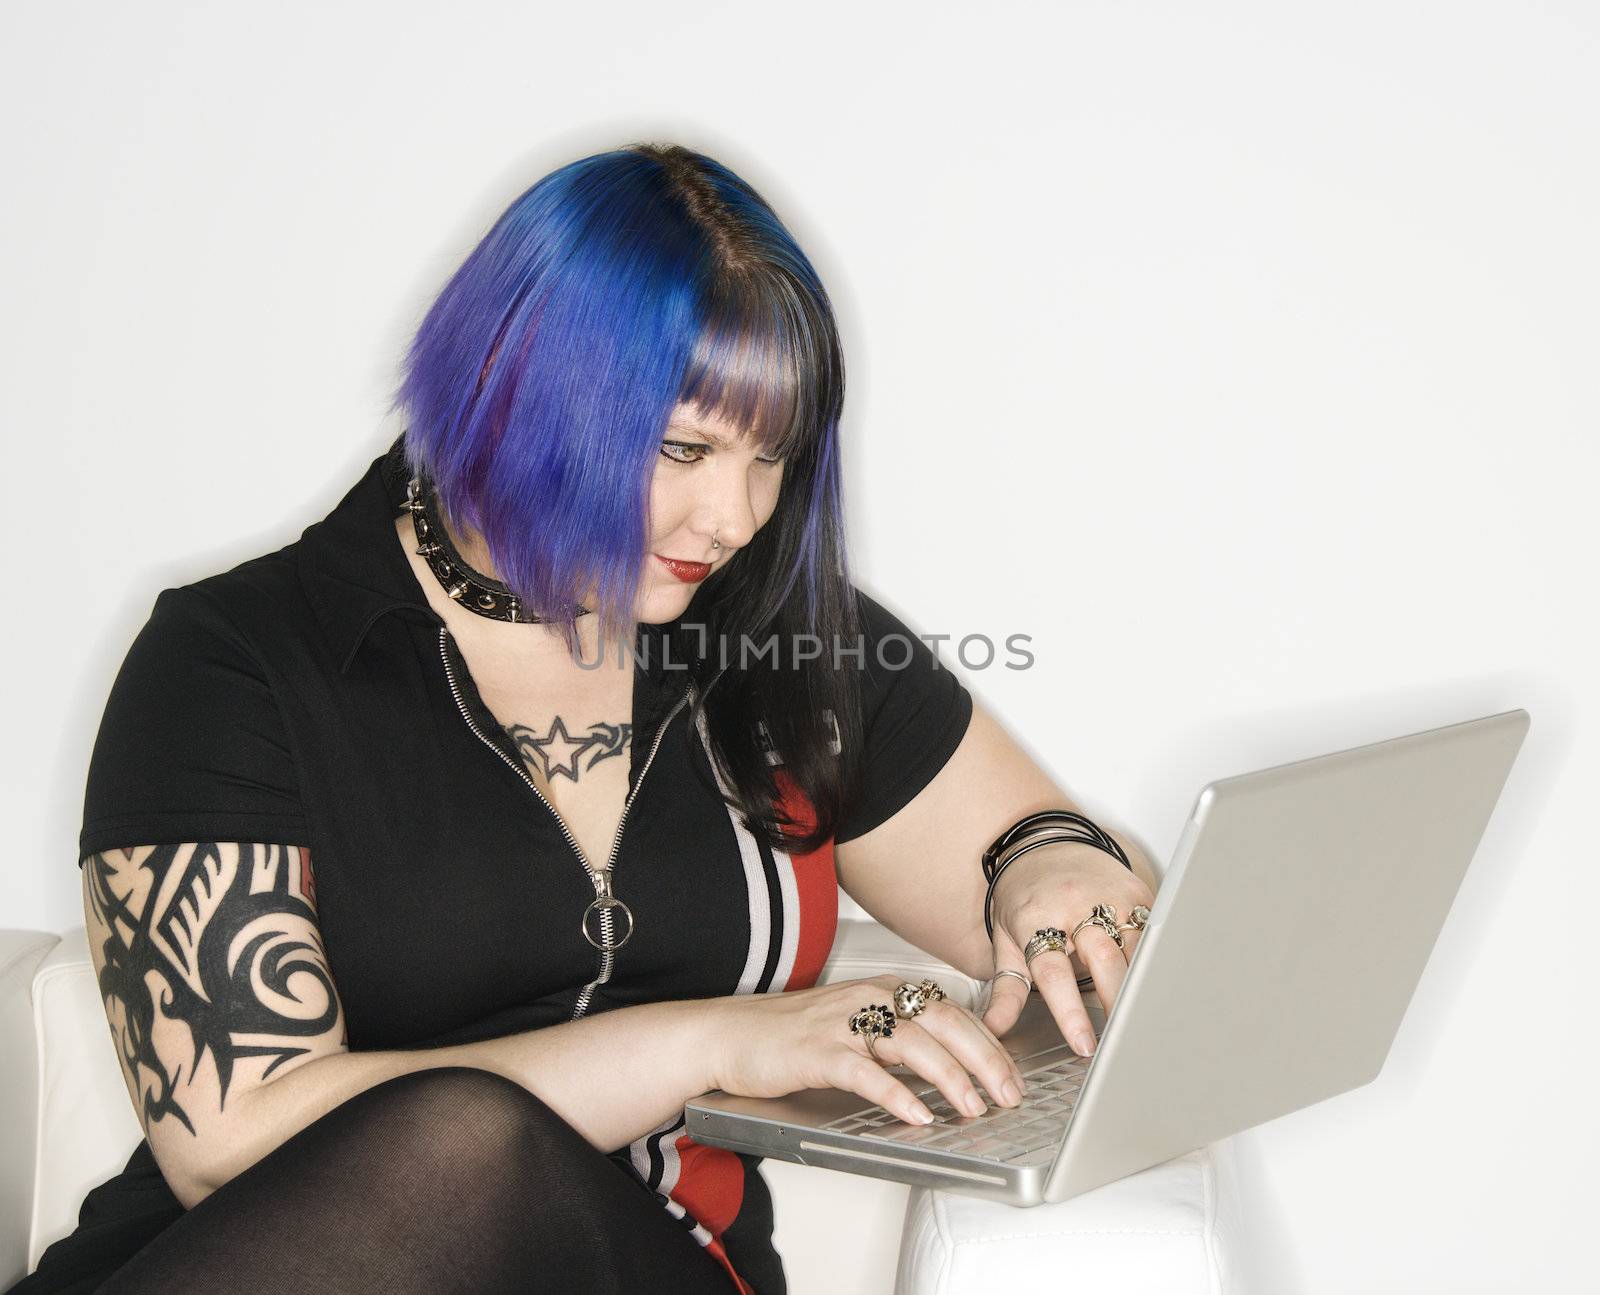 Portrait of Caucasian woman with blue hair, tattoo, and spike collar typing on laptop against white background.